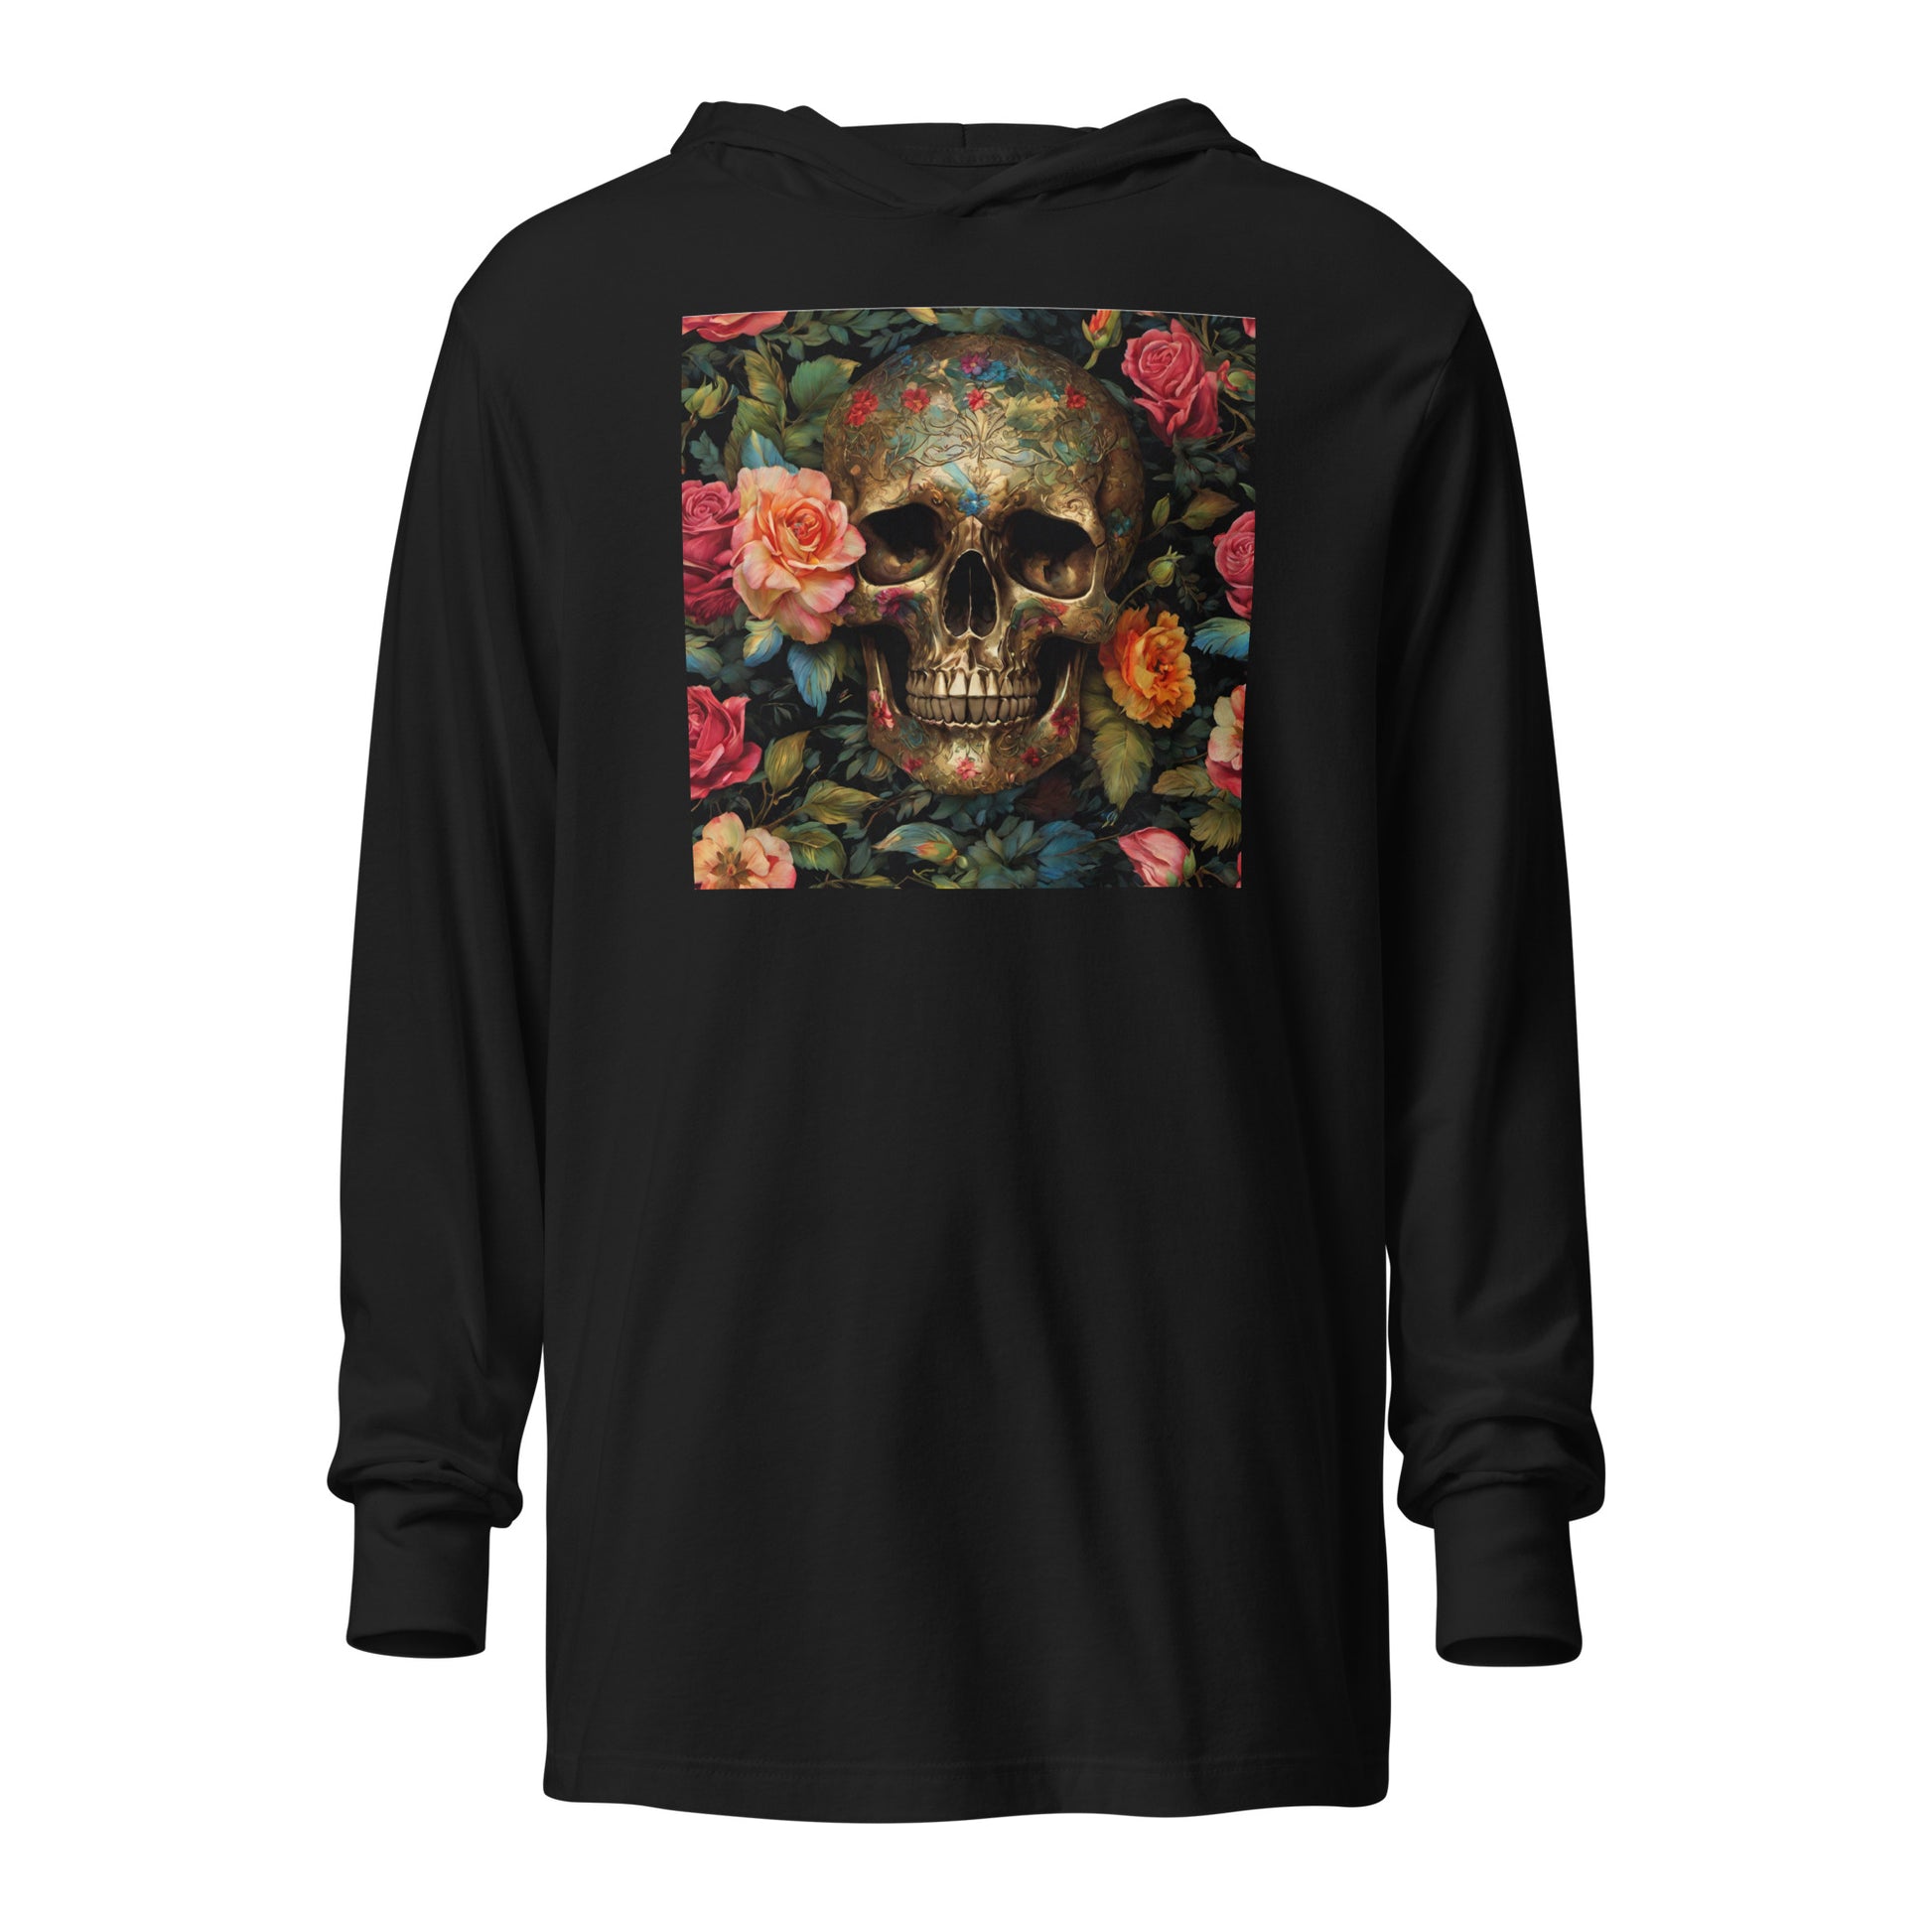 Skull and Roses Graphic Hooded Long-Sleeve Tee Black